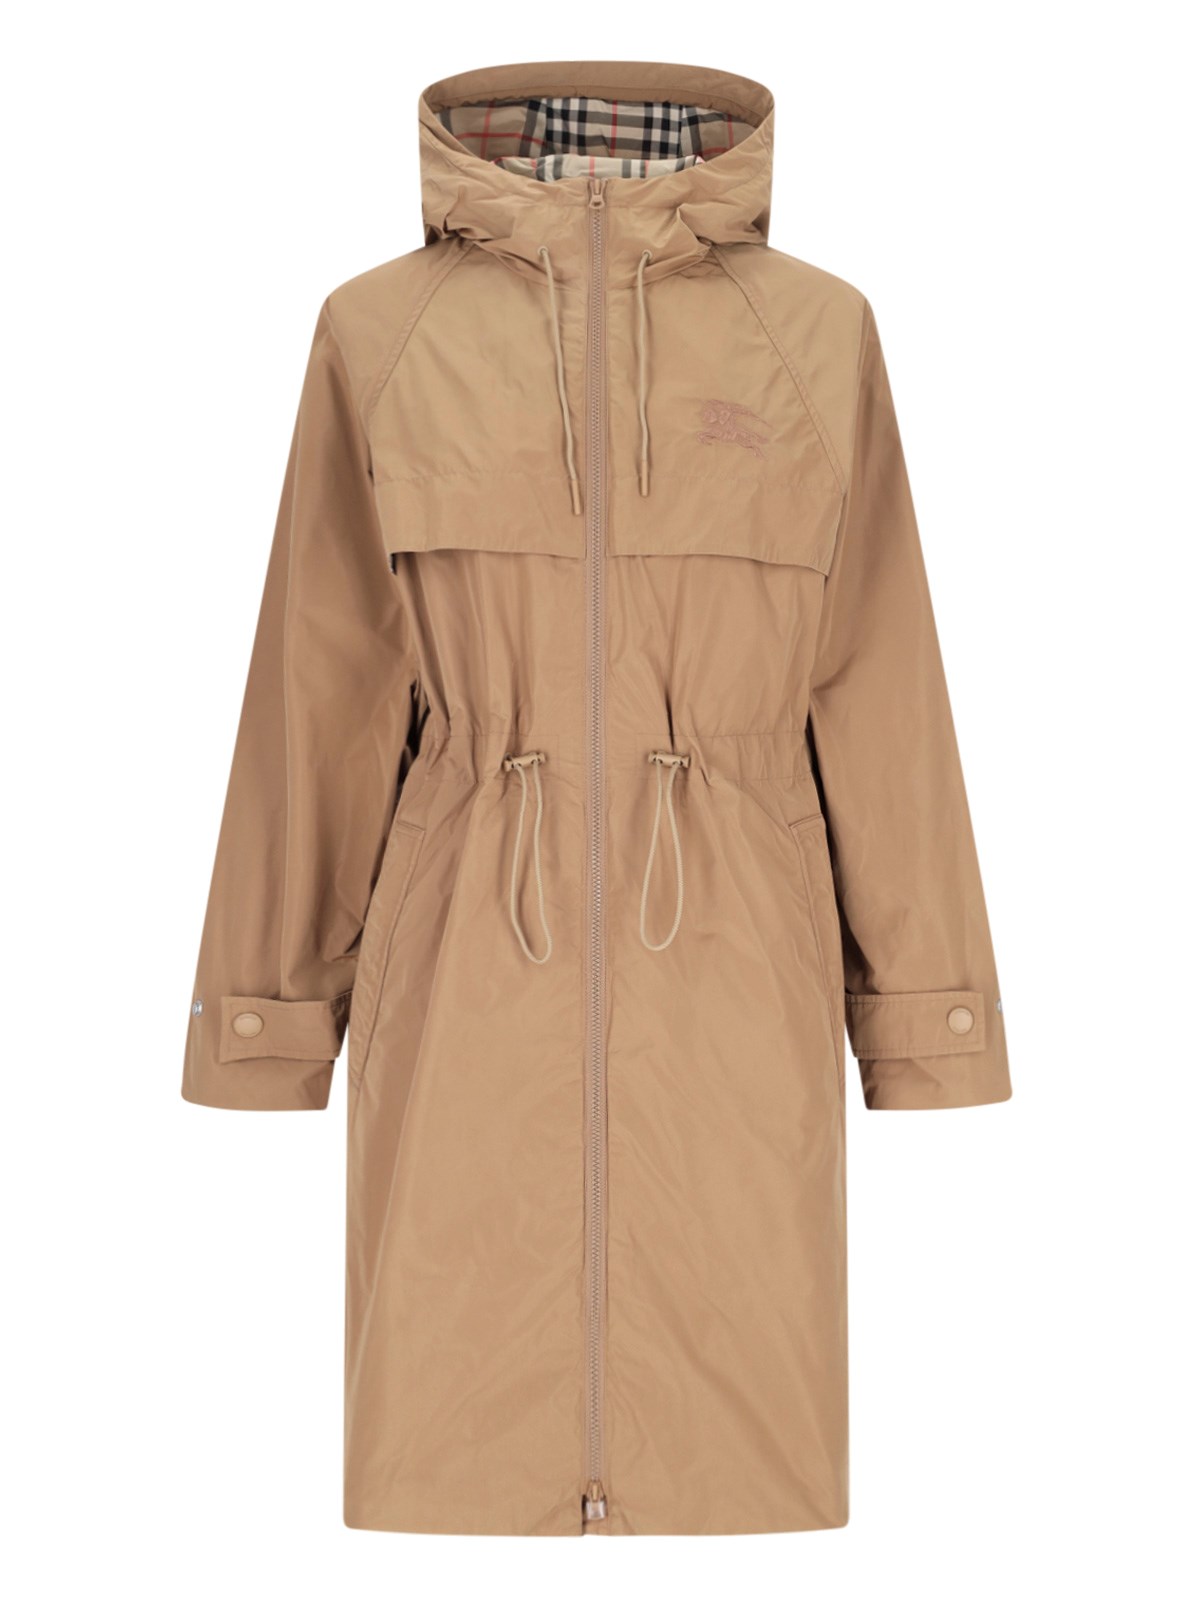 BURBERRY 'EKD' EMBROIDERY TRENCH COAT